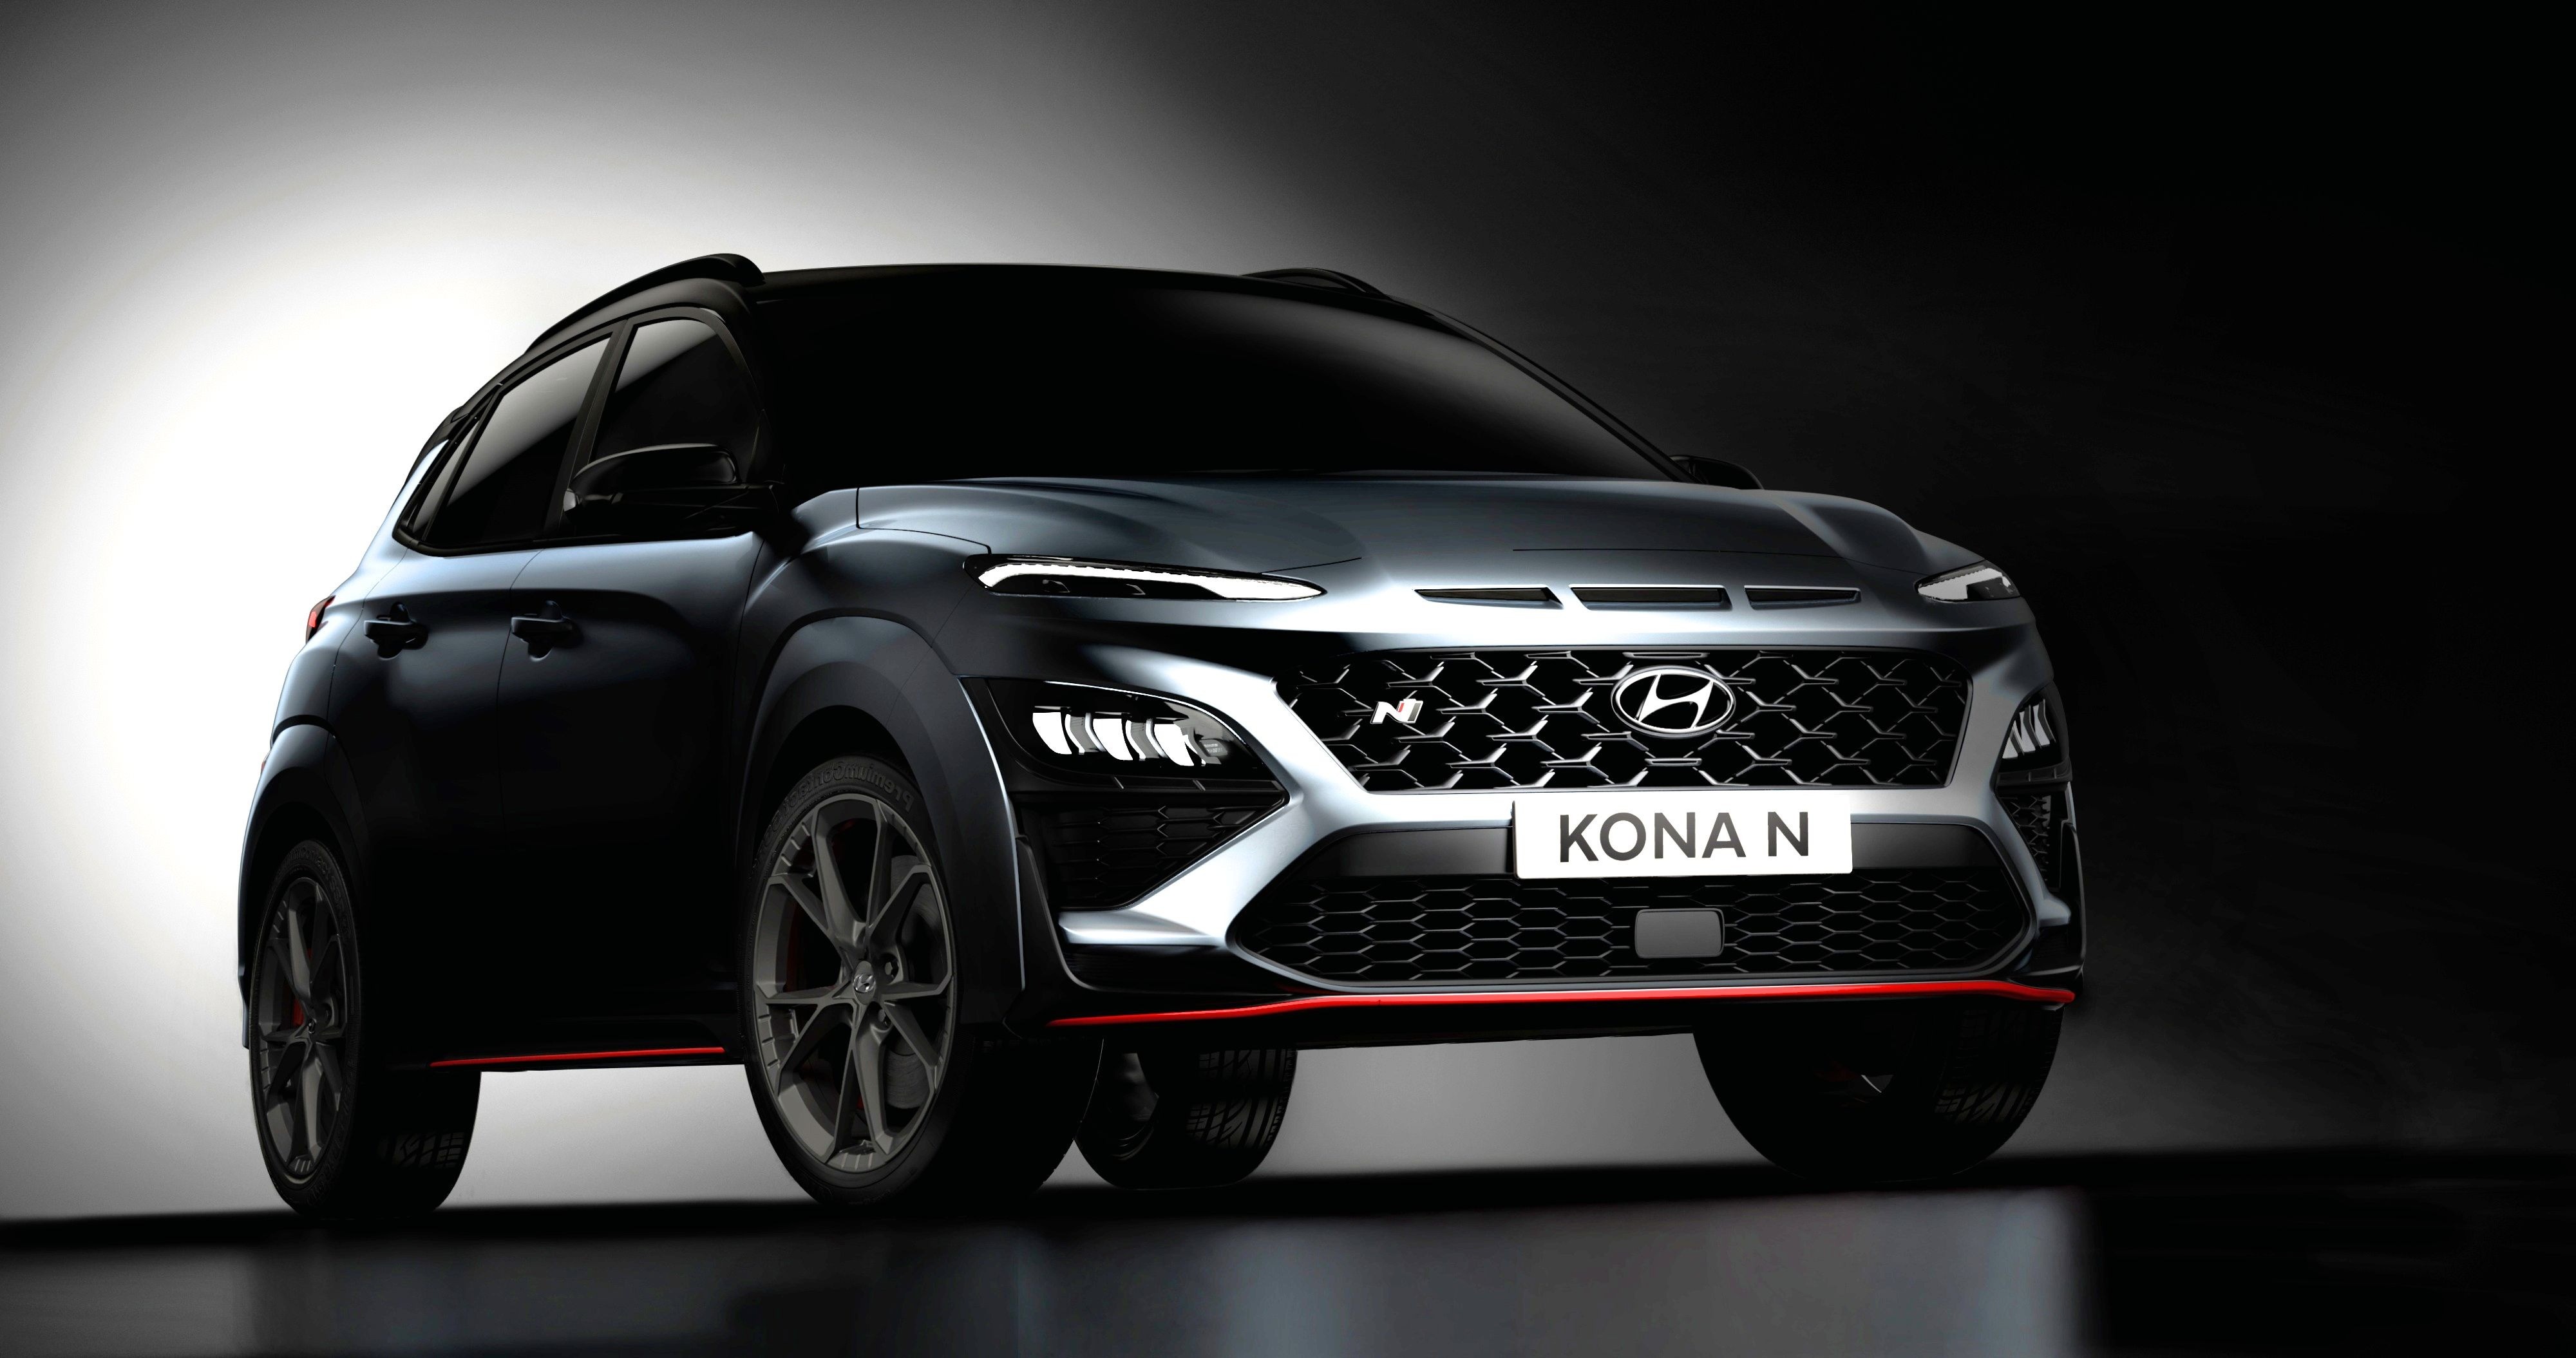 The Hyundai Kona N Will Use an 8Speed DualClutch, Here’s What Makes